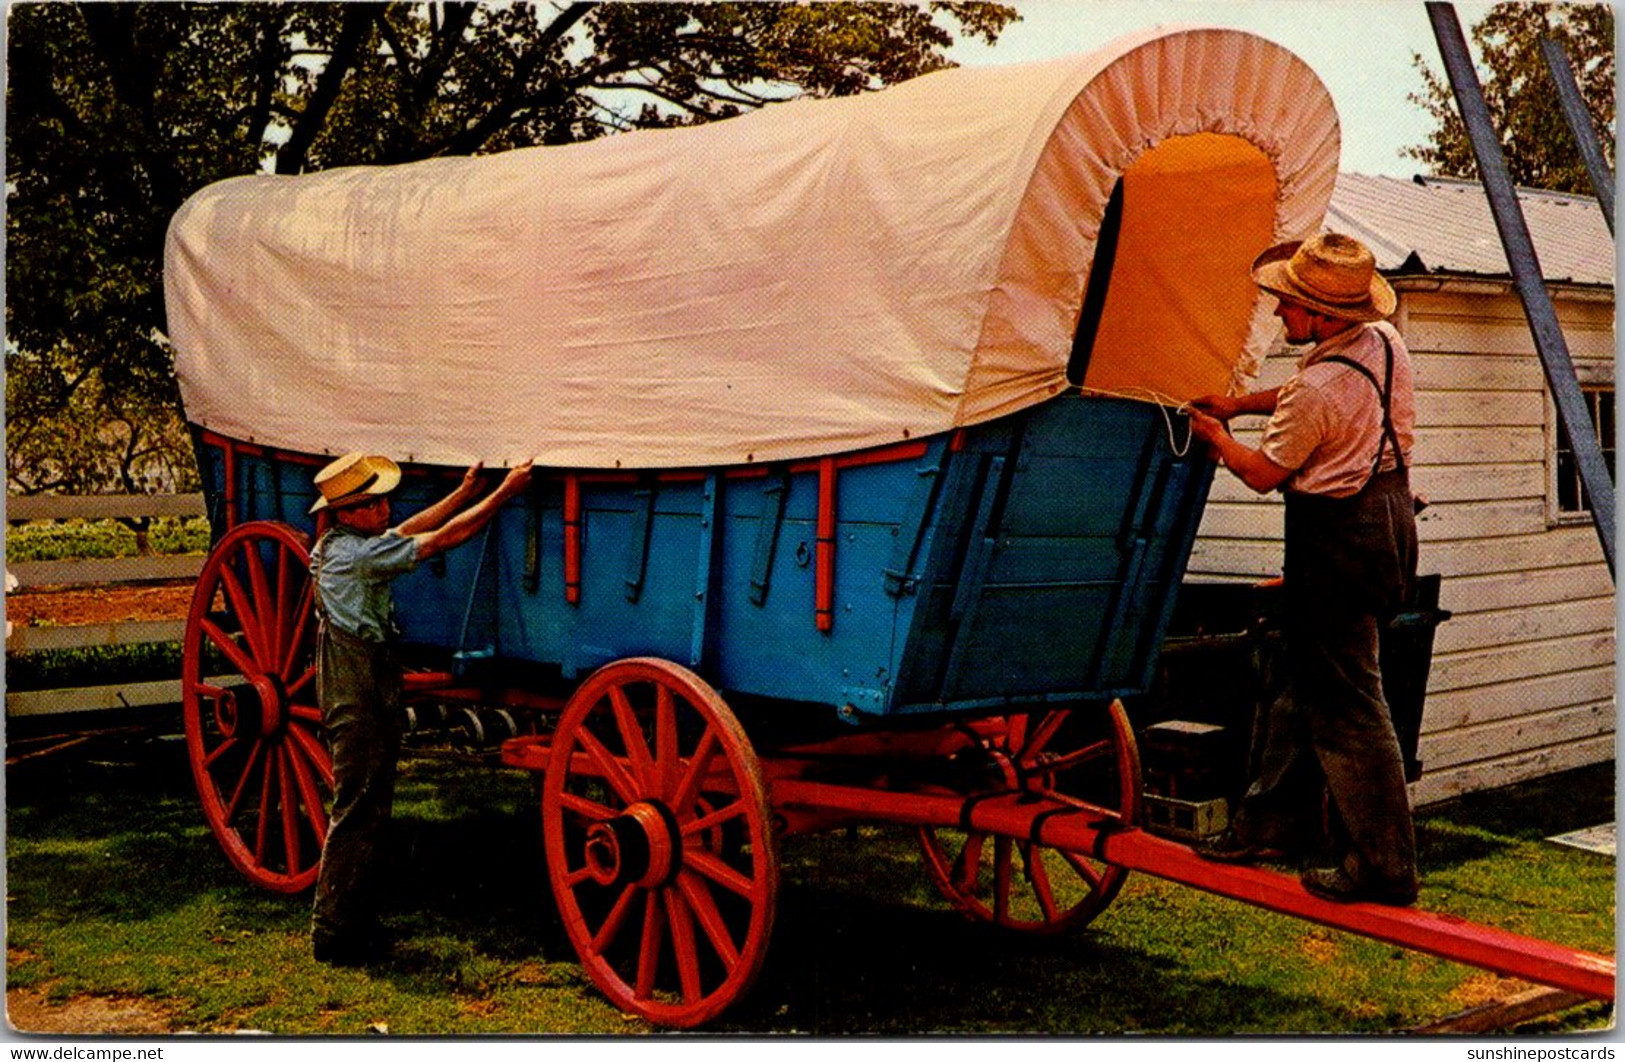 Pennsylvania "Amishland" Old Covered Wagon Amish Carriage Makers Restore An Old Wagon - Lancaster